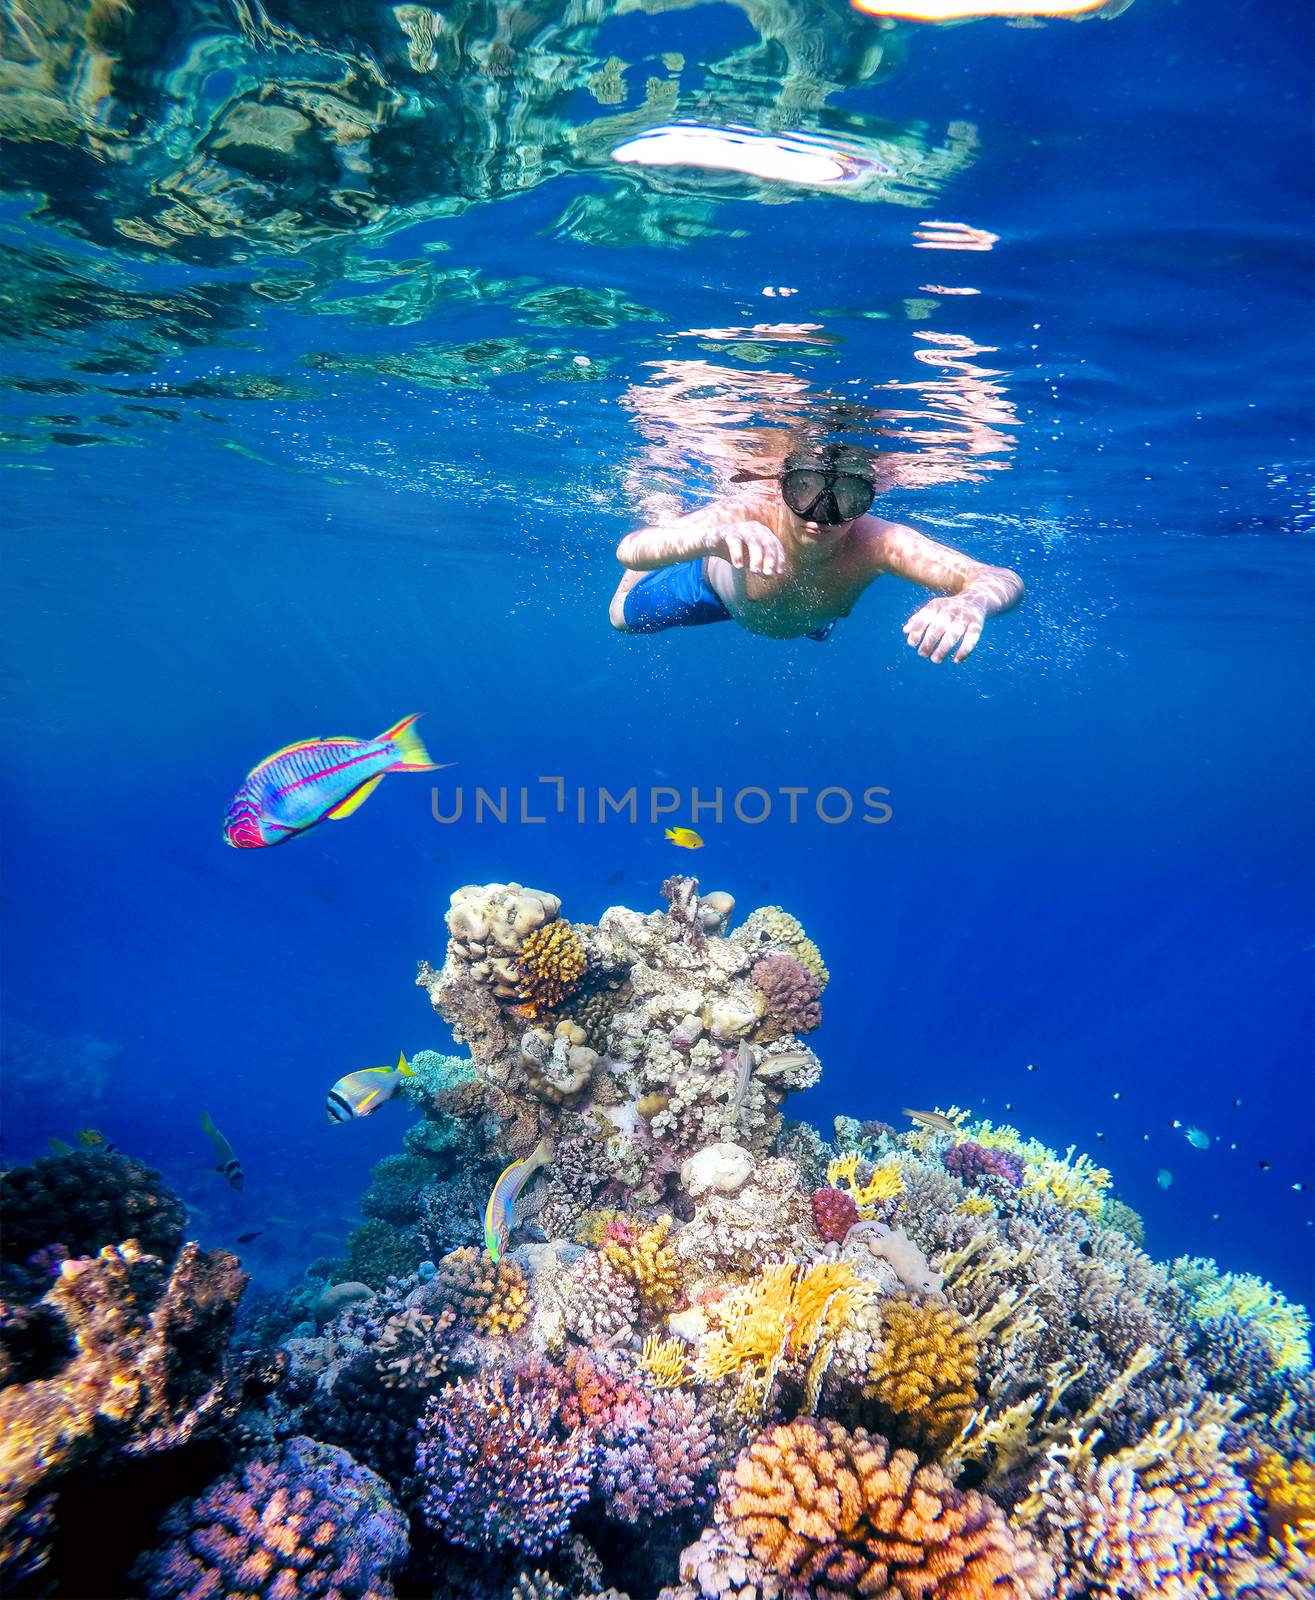 Underwater shoot of a young boy snorkeling and diving in a tropical red sea coral reef with Klunzinger's Wrasse (Thalassoma rueppellii)Also known as Lunate-tailed Wrasses and other fish in Egypt